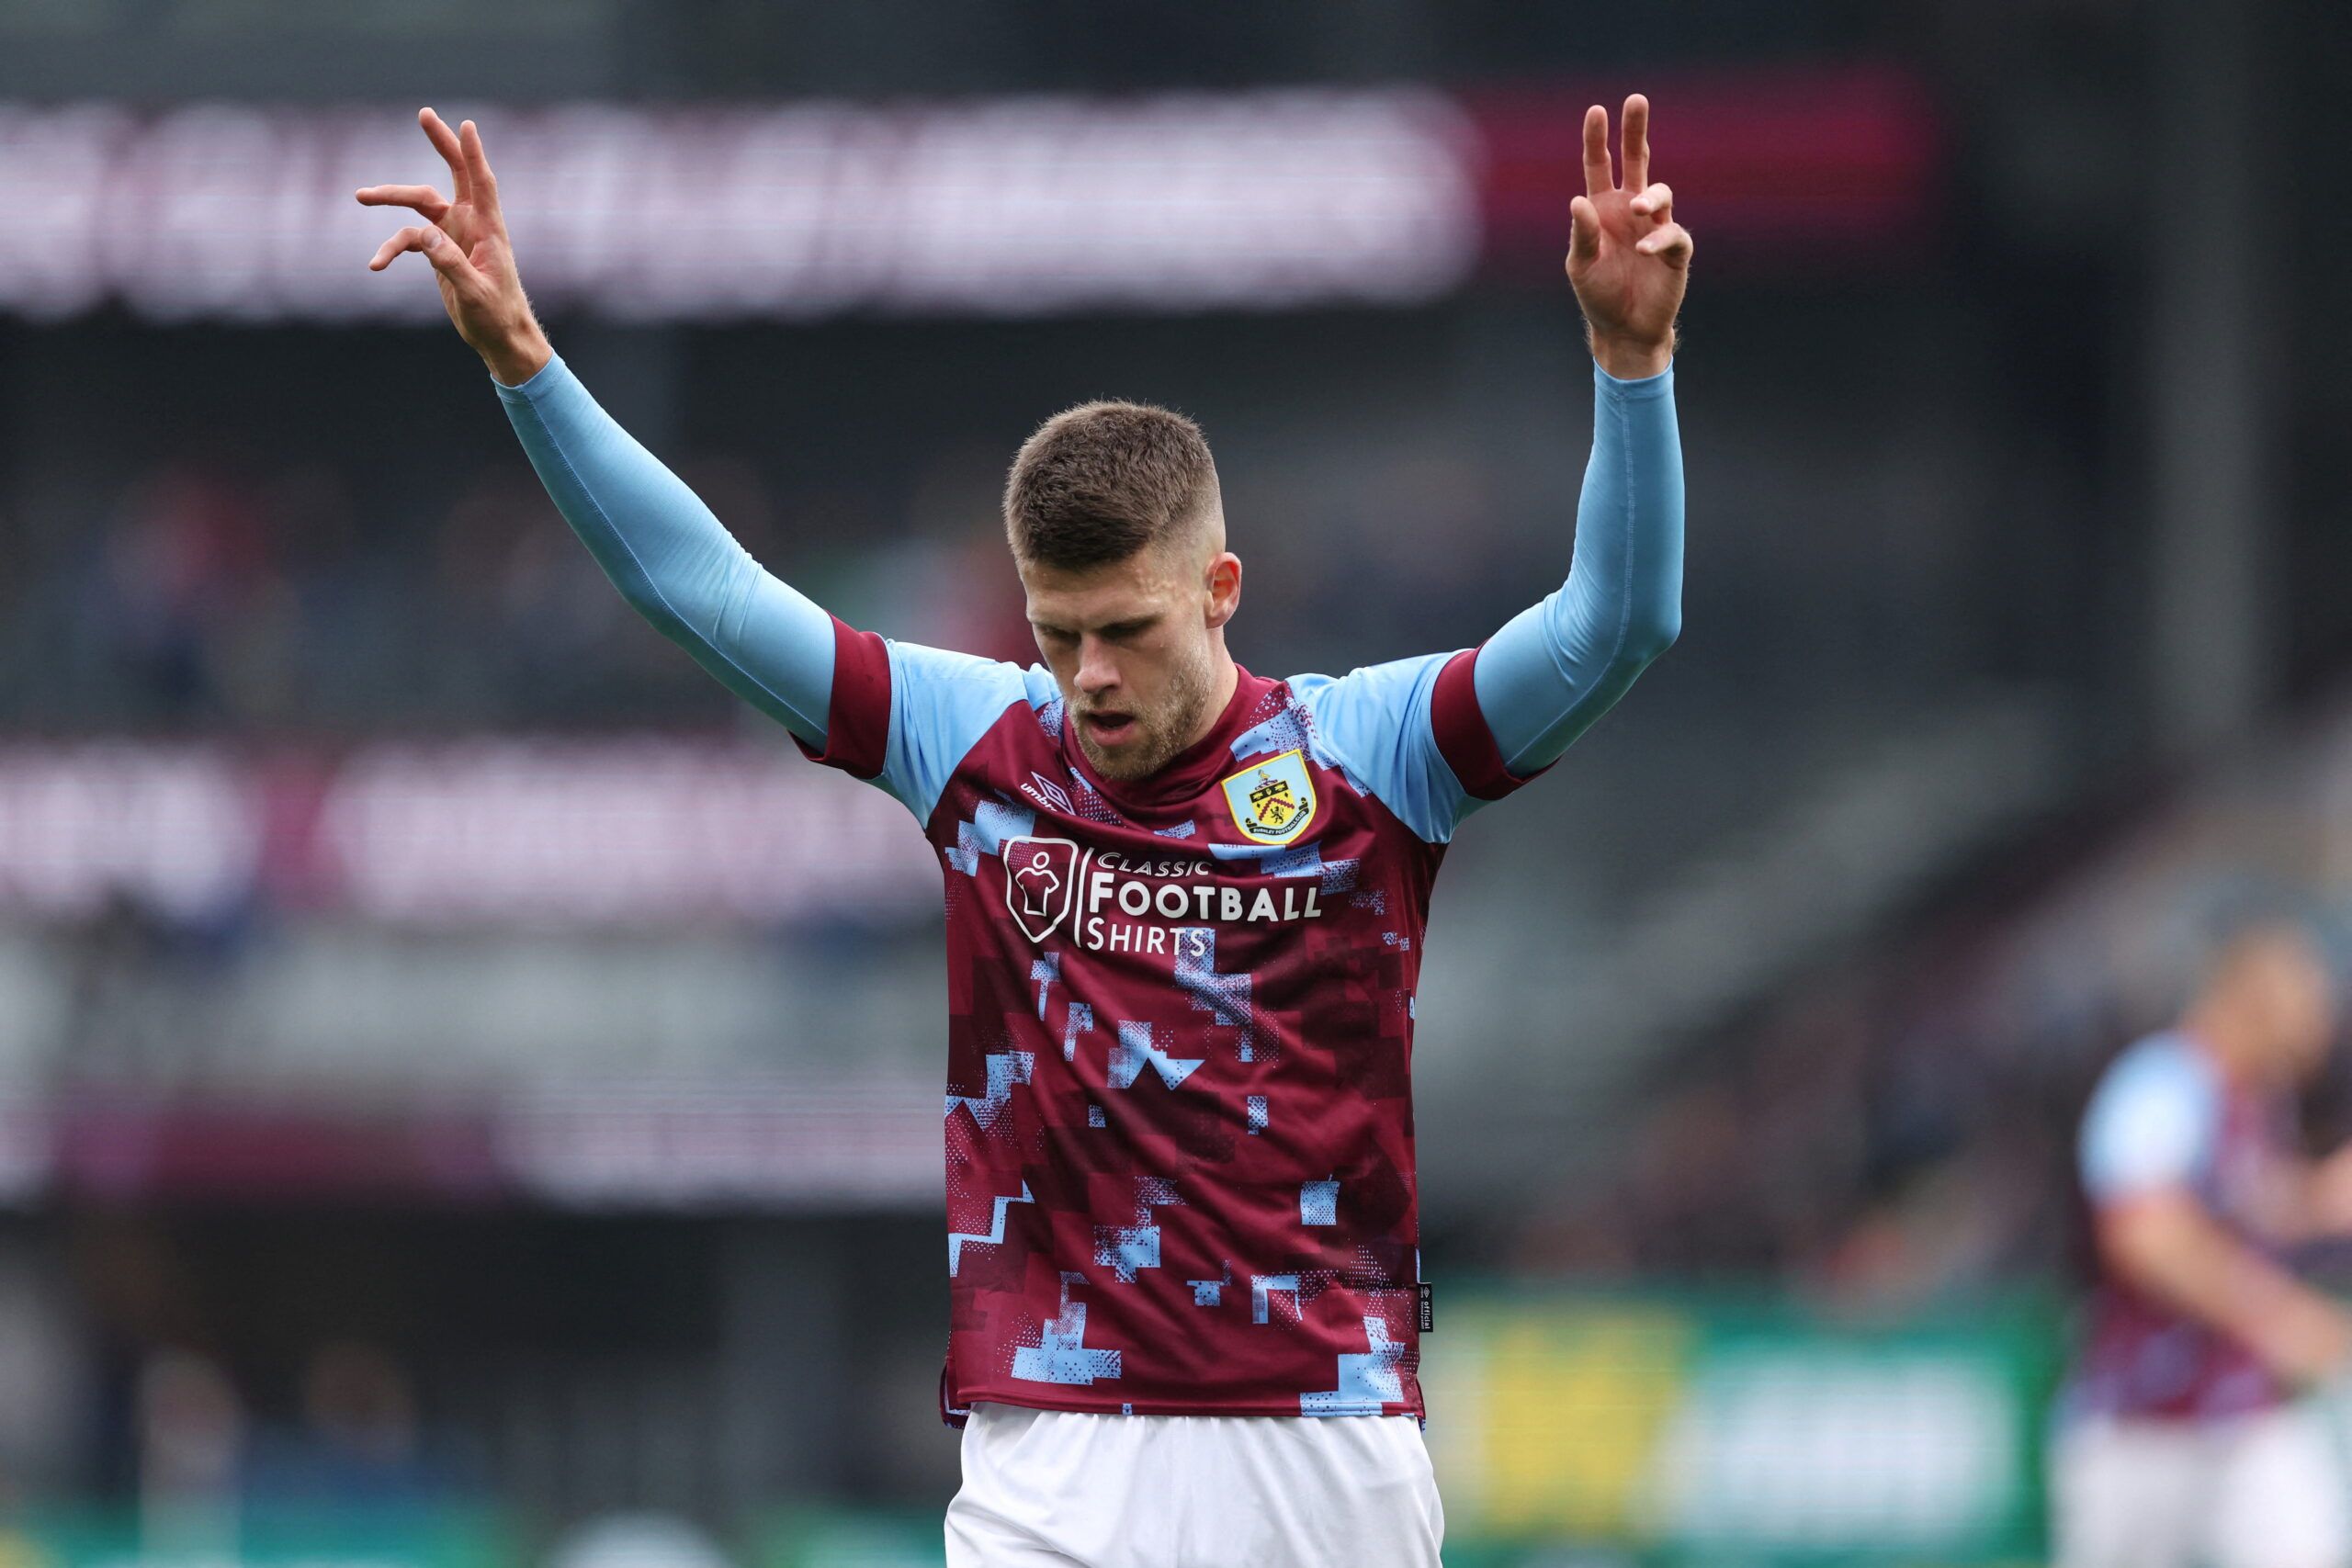 Soccer Football - Championship - Burnley v Reading - Turf Moor, Burnley, Britain - October 29, 2022  Burnley's Johann Gudmundsson lifts his arms  Action Images/John Clifton   EDITORIAL USE ONLY. No use with unauthorized audio, video, data, fixture lists, club/league logos or 